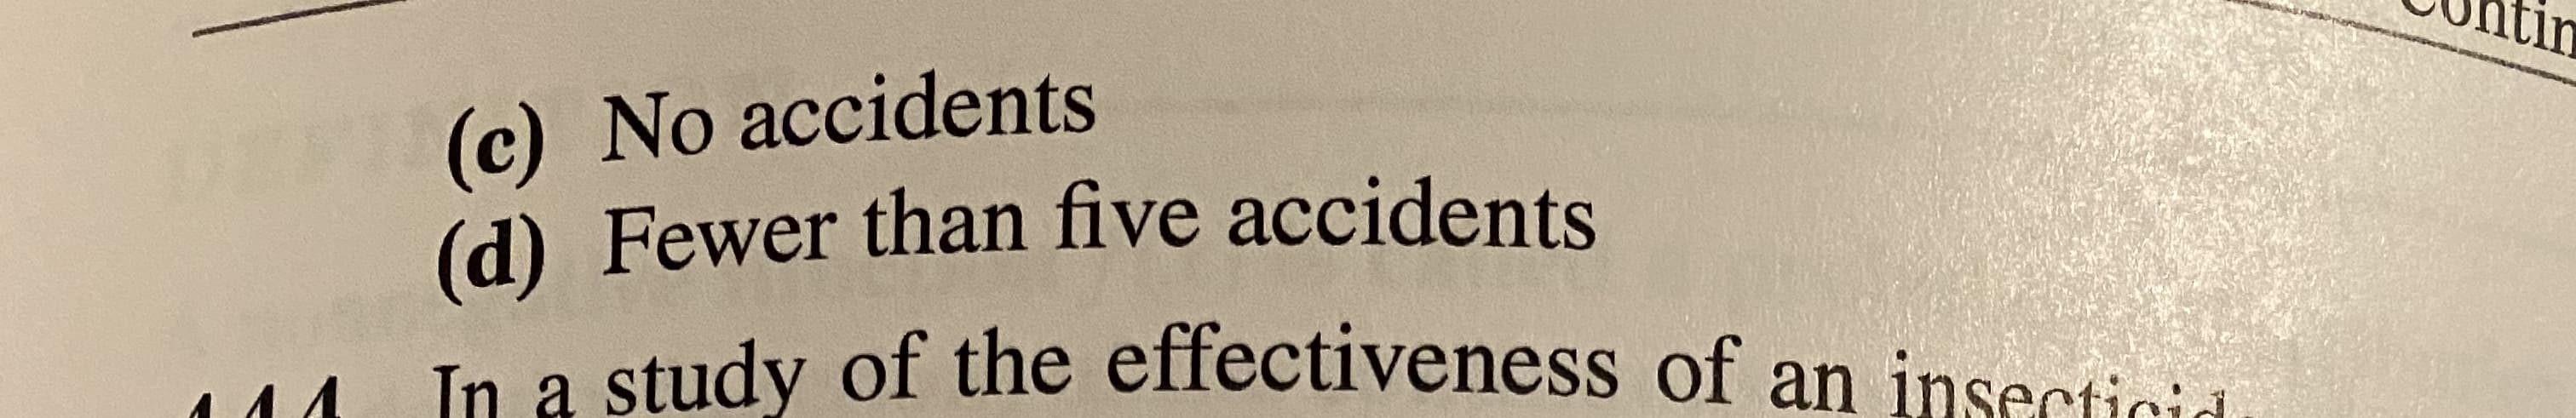 tin
(c) No accidents
(d) Fewer than five accidents
Tn a study of the effectiveness of an insectioii
In
